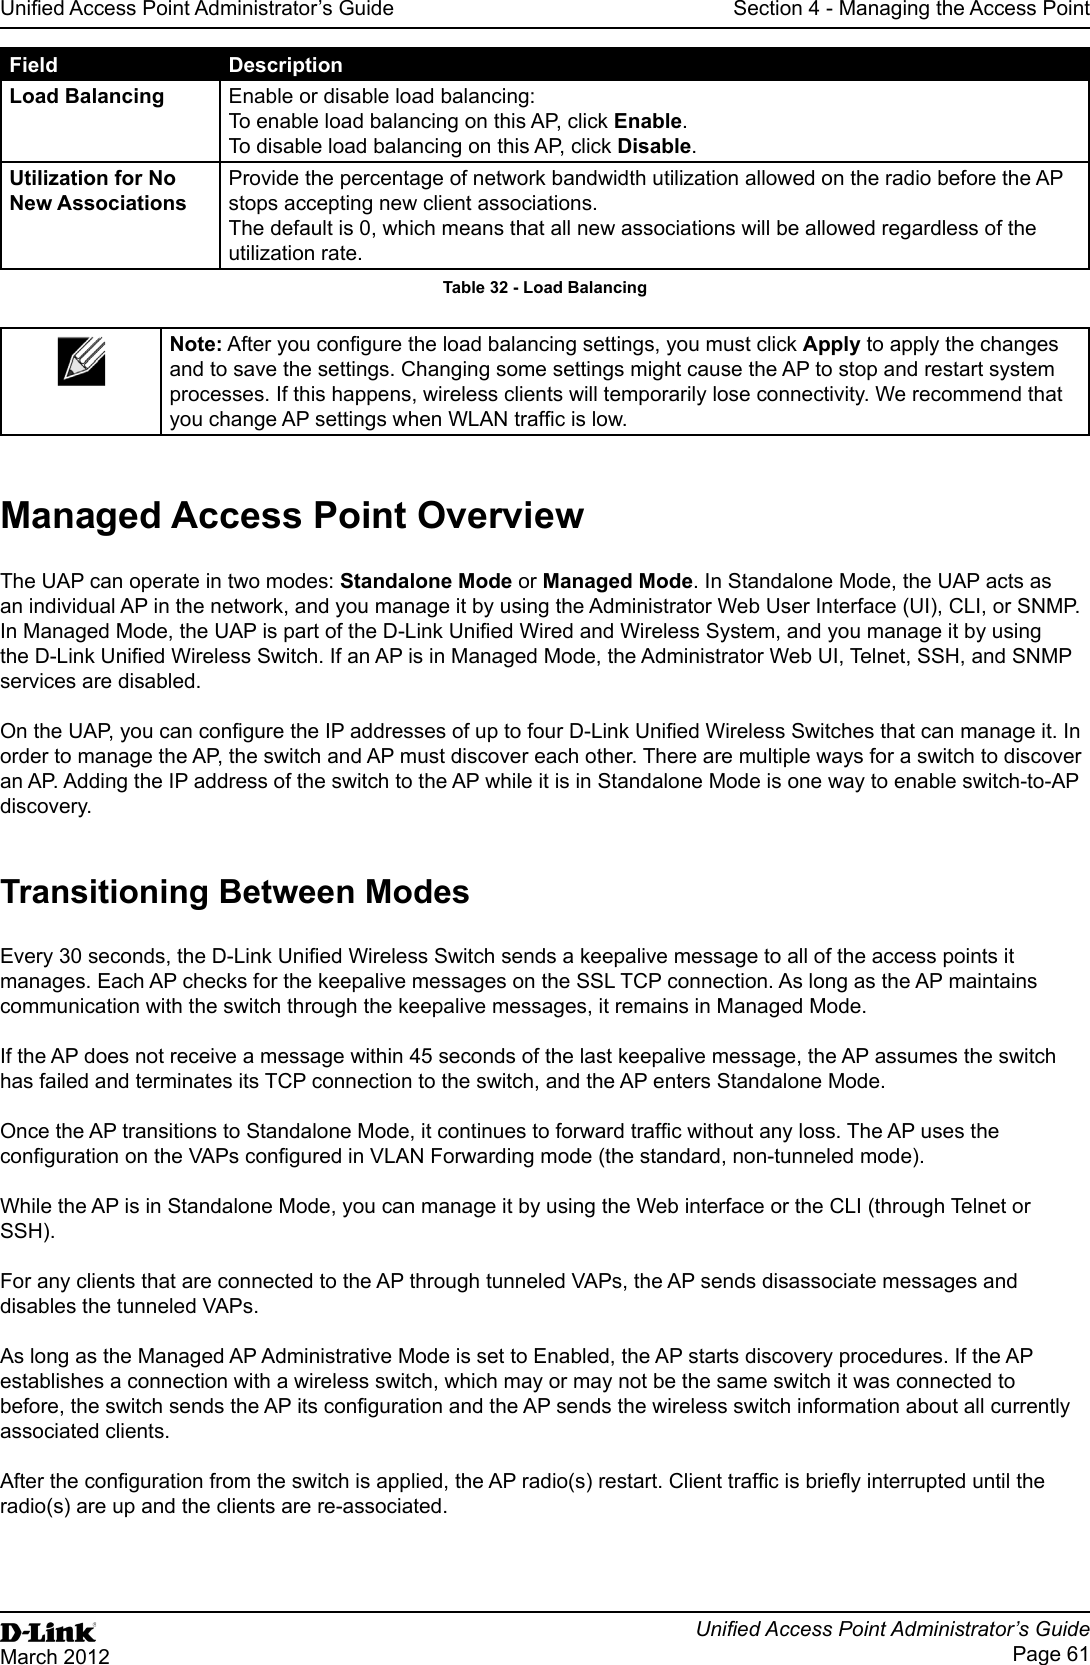 Unied Access Point Administrator’s GuideUnied Access Point Administrator’s GuidePage 61March 2012Section 4 - Managing the Access PointField DescriptionLoad Balancing Enable or disable load balancing:To enable load balancing on this AP, click Enable.To disable load balancing on this AP, click Disable.Utilization for No New AssociationsProvide the percentage of network bandwidth utilization allowed on the radio before the AP stops accepting new client associations. The default is 0, which means that all new associations will be allowed regardless of the utilization rate.Table 32 - Load BalancingNote: After you congure the load balancing settings, you must click Apply to apply the changes and to save the settings. Changing some settings might cause the AP to stop and restart system processes. If this happens, wireless clients will temporarily lose connectivity. We recommend that you change AP settings when WLAN trafc is low. Managed Access Point OverviewThe UAP can operate in two modes: Standalone Mode or Managed Mode. In Standalone Mode, the UAP acts as an individual AP in the network, and you manage it by using the Administrator Web User Interface (UI), CLI, or SNMP. In Managed Mode, the UAP is part of the D-Link Unied Wired and Wireless System, and you manage it by using the D-Link Unied Wireless Switch. If an AP is in Managed Mode, the Administrator Web UI, Telnet, SSH, and SNMP services are disabled.On the UAP, you can congure the IP addresses of up to four D-Link Unied Wireless Switches that can manage it. In order to manage the AP, the switch and AP must discover each other. There are multiple ways for a switch to discover an AP. Adding the IP address of the switch to the AP while it is in Standalone Mode is one way to enable switch-to-AP discovery.Transitioning Between ModesEvery 30 seconds, the D-Link Unied Wireless Switch sends a keepalive message to all of the access points it manages. Each AP checks for the keepalive messages on the SSL TCP connection. As long as the AP maintains communication with the switch through the keepalive messages, it remains in Managed Mode.If the AP does not receive a message within 45 seconds of the last keepalive message, the AP assumes the switch has failed and terminates its TCP connection to the switch, and the AP enters Standalone Mode.Once the AP transitions to Standalone Mode, it continues to forward trafc without any loss. The AP uses the conguration on the VAPs congured in VLAN Forwarding mode (the standard, non-tunneled mode).While the AP is in Standalone Mode, you can manage it by using the Web interface or the CLI (through Telnet or SSH).For any clients that are connected to the AP through tunneled VAPs, the AP sends disassociate messages and disables the tunneled VAPs.As long as the Managed AP Administrative Mode is set to Enabled, the AP starts discovery procedures. If the AP establishes a connection with a wireless switch, which may or may not be the same switch it was connected to before, the switch sends the AP its conguration and the AP sends the wireless switch information about all currently associated clients.After the conguration from the switch is applied, the AP radio(s) restart. Client trafc is briey interrupted until the radio(s) are up and the clients are re-associated.